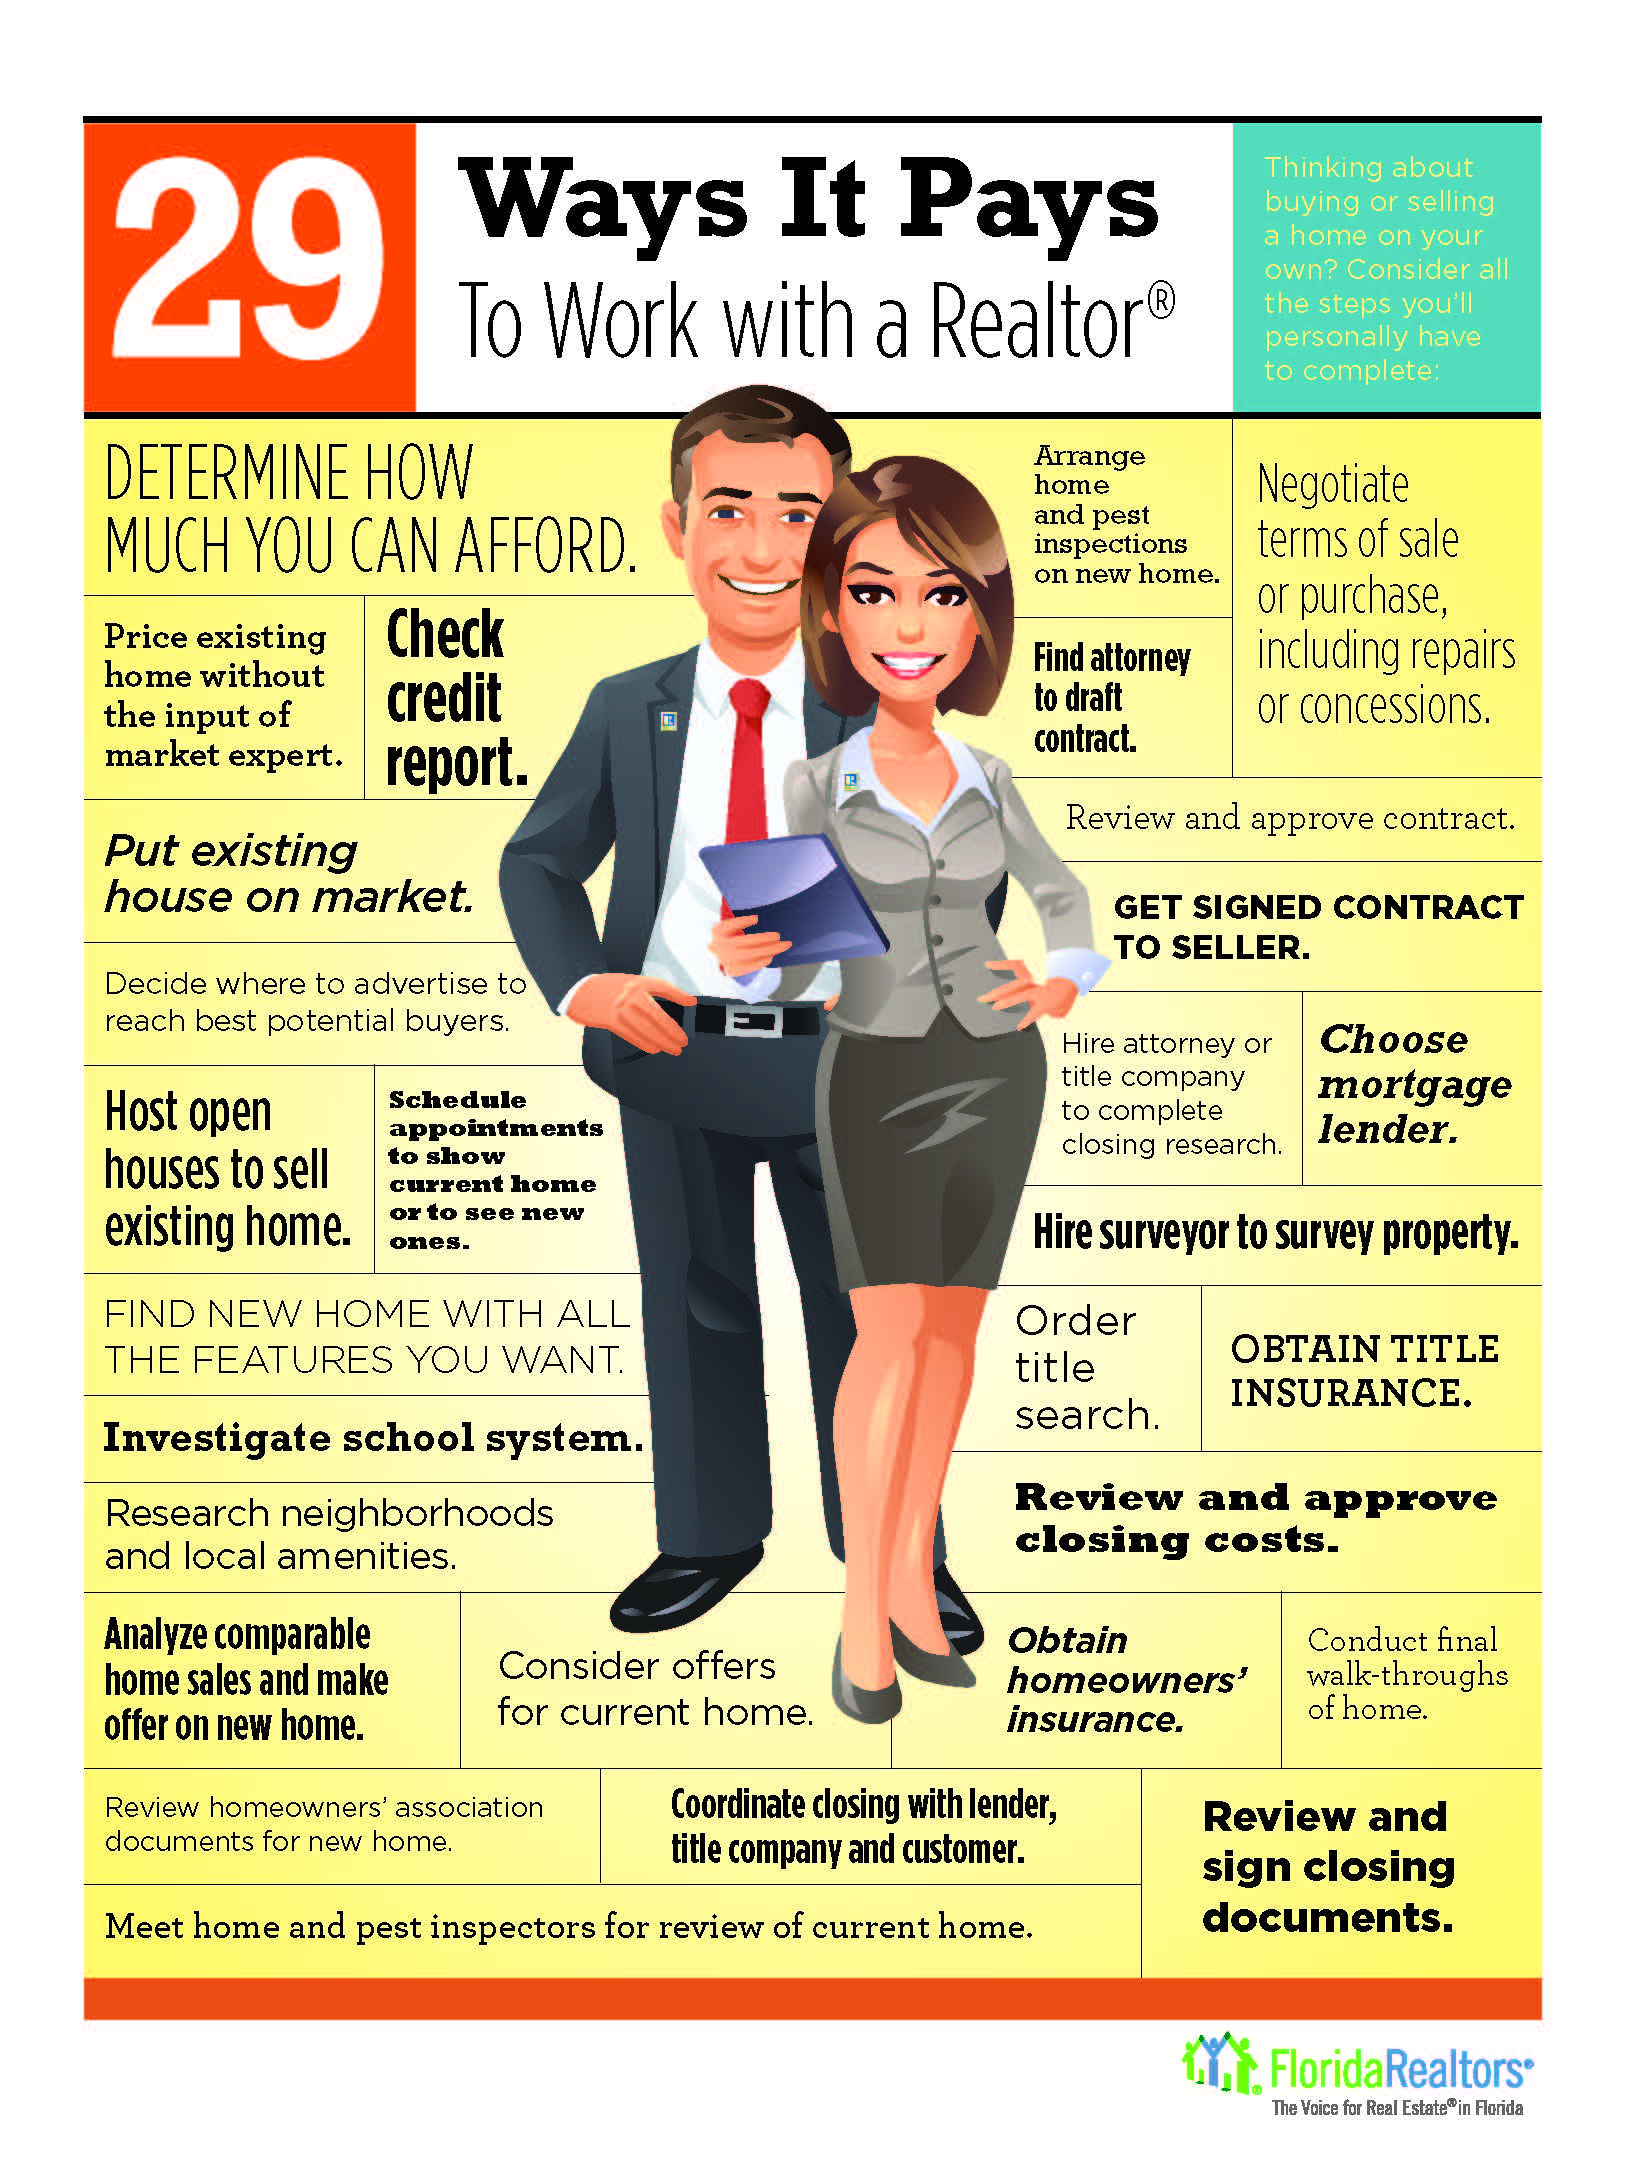 29 Ways it Pays to Work with a Realtor®